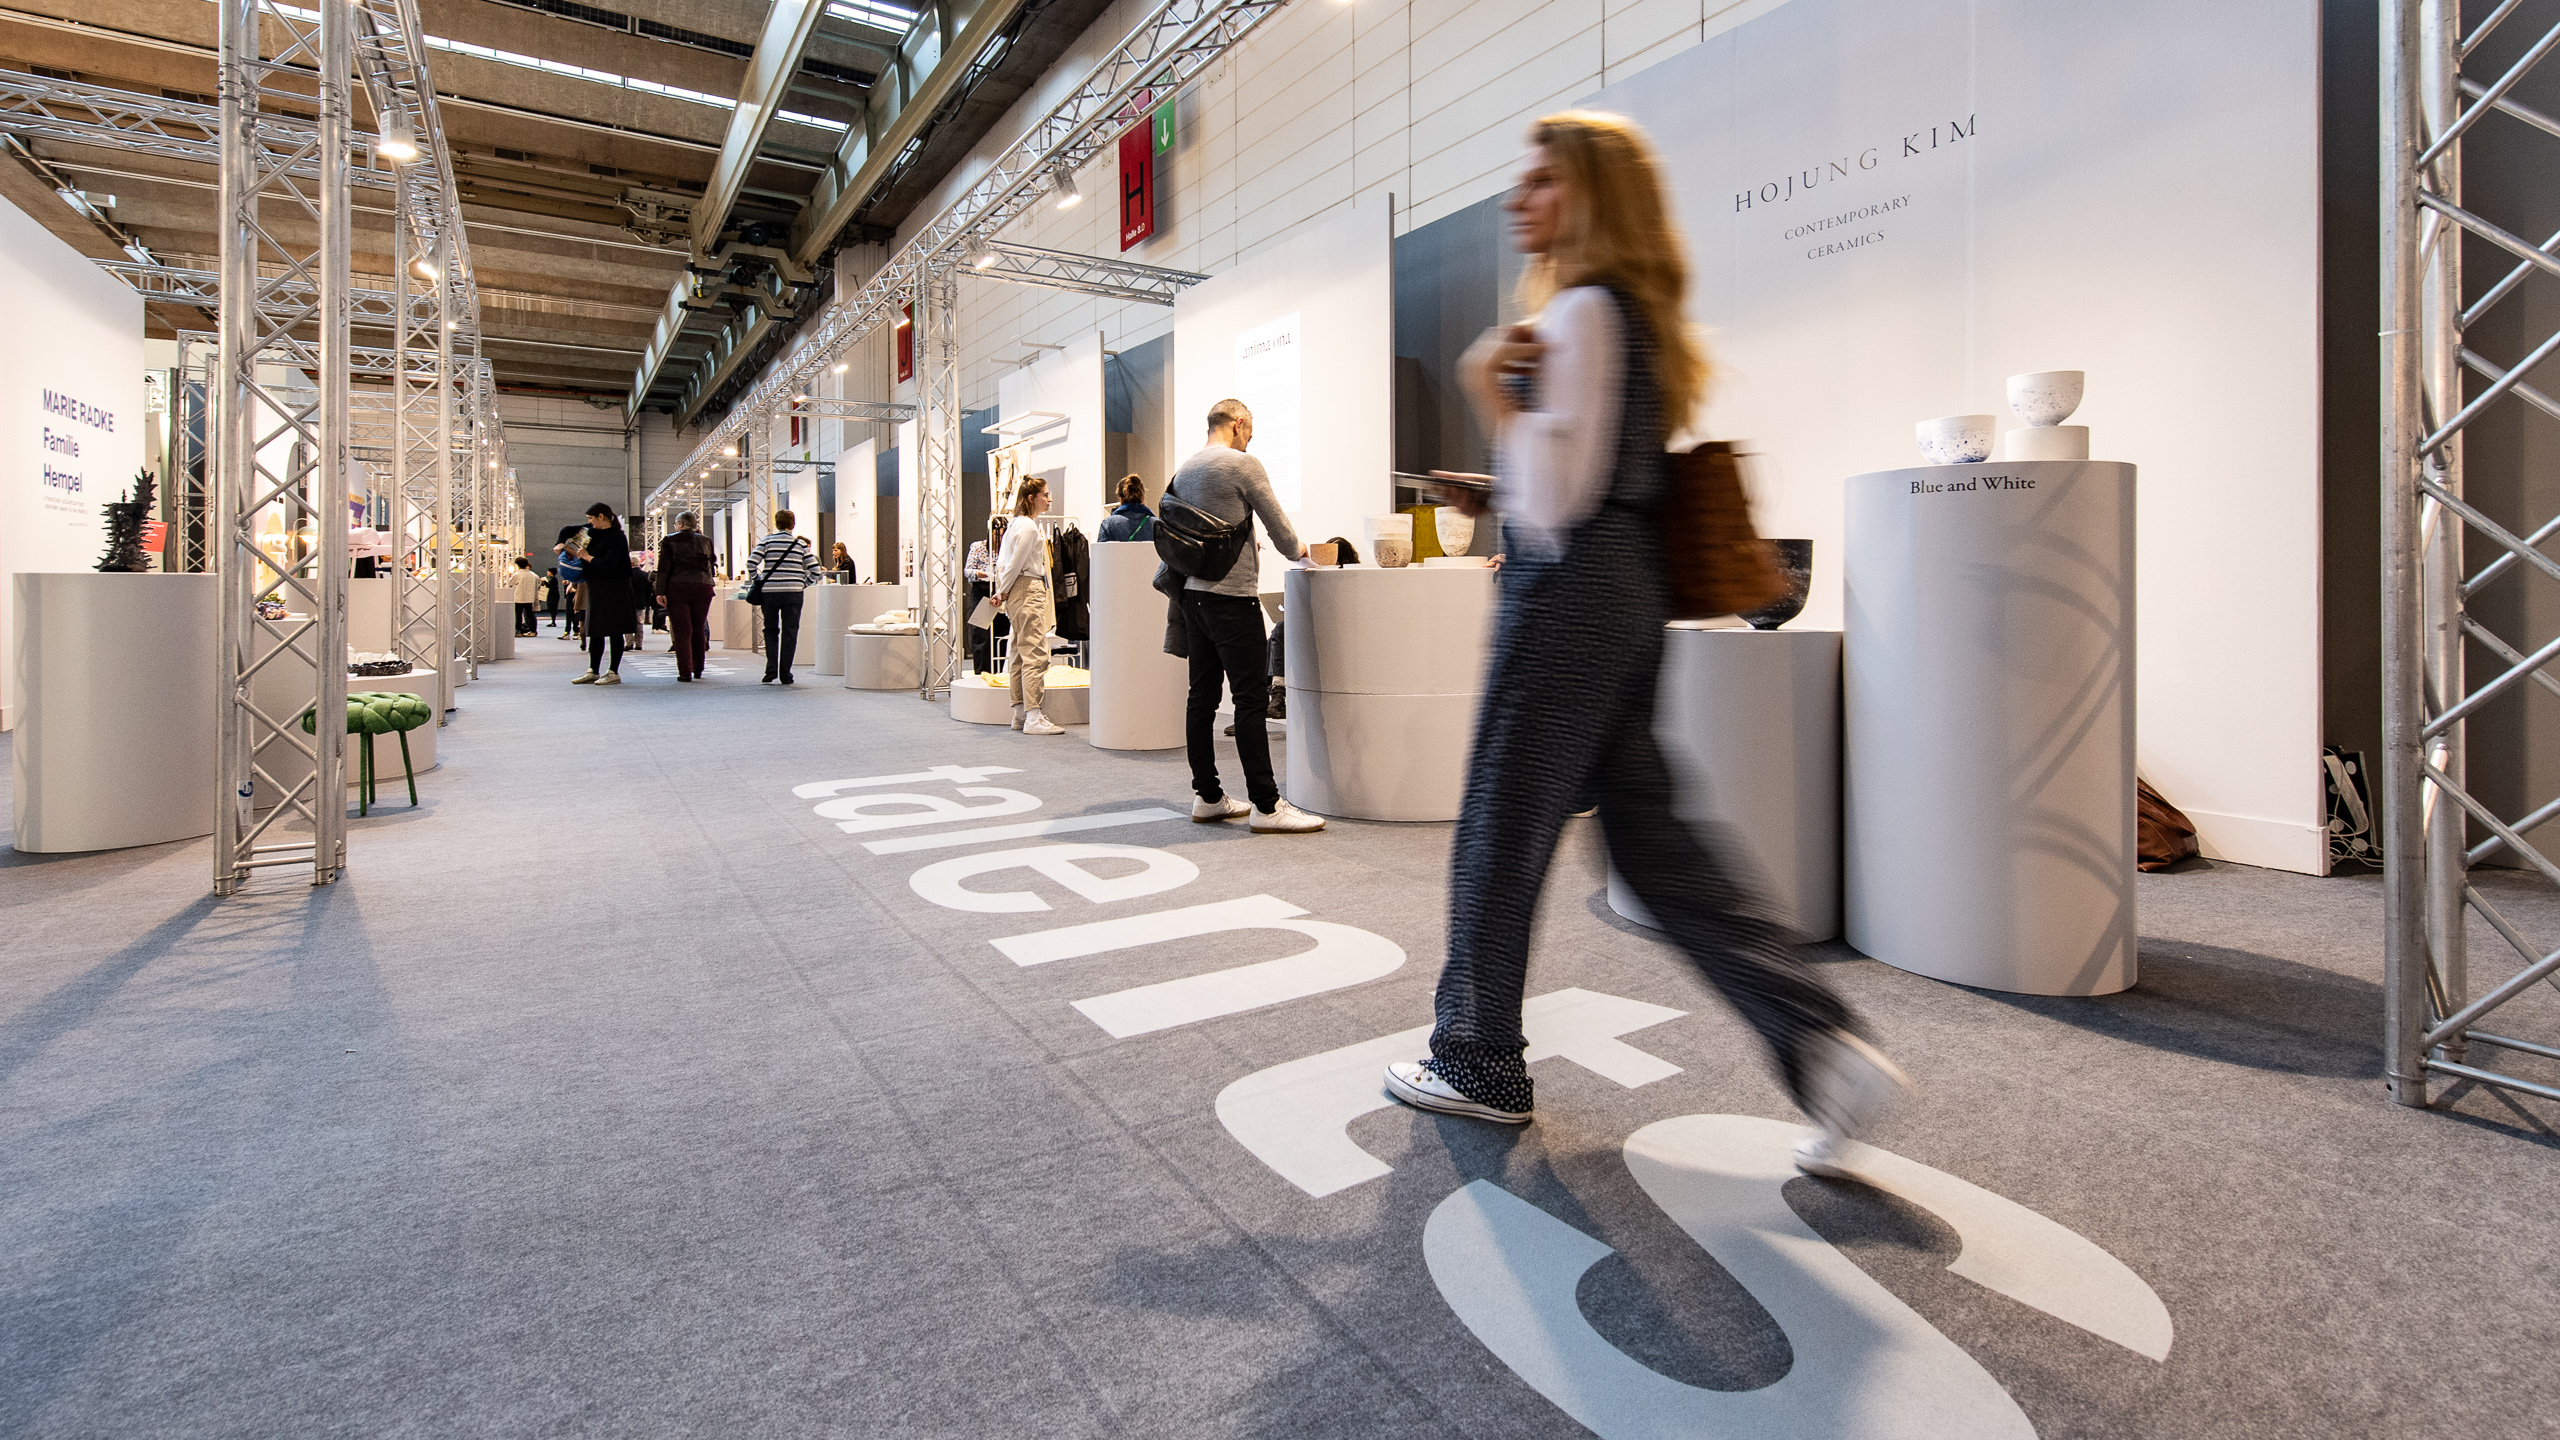 The "Talents" present their design innovations in Halls 3.1 and 12.1. Photo: Messe Frankfurt.